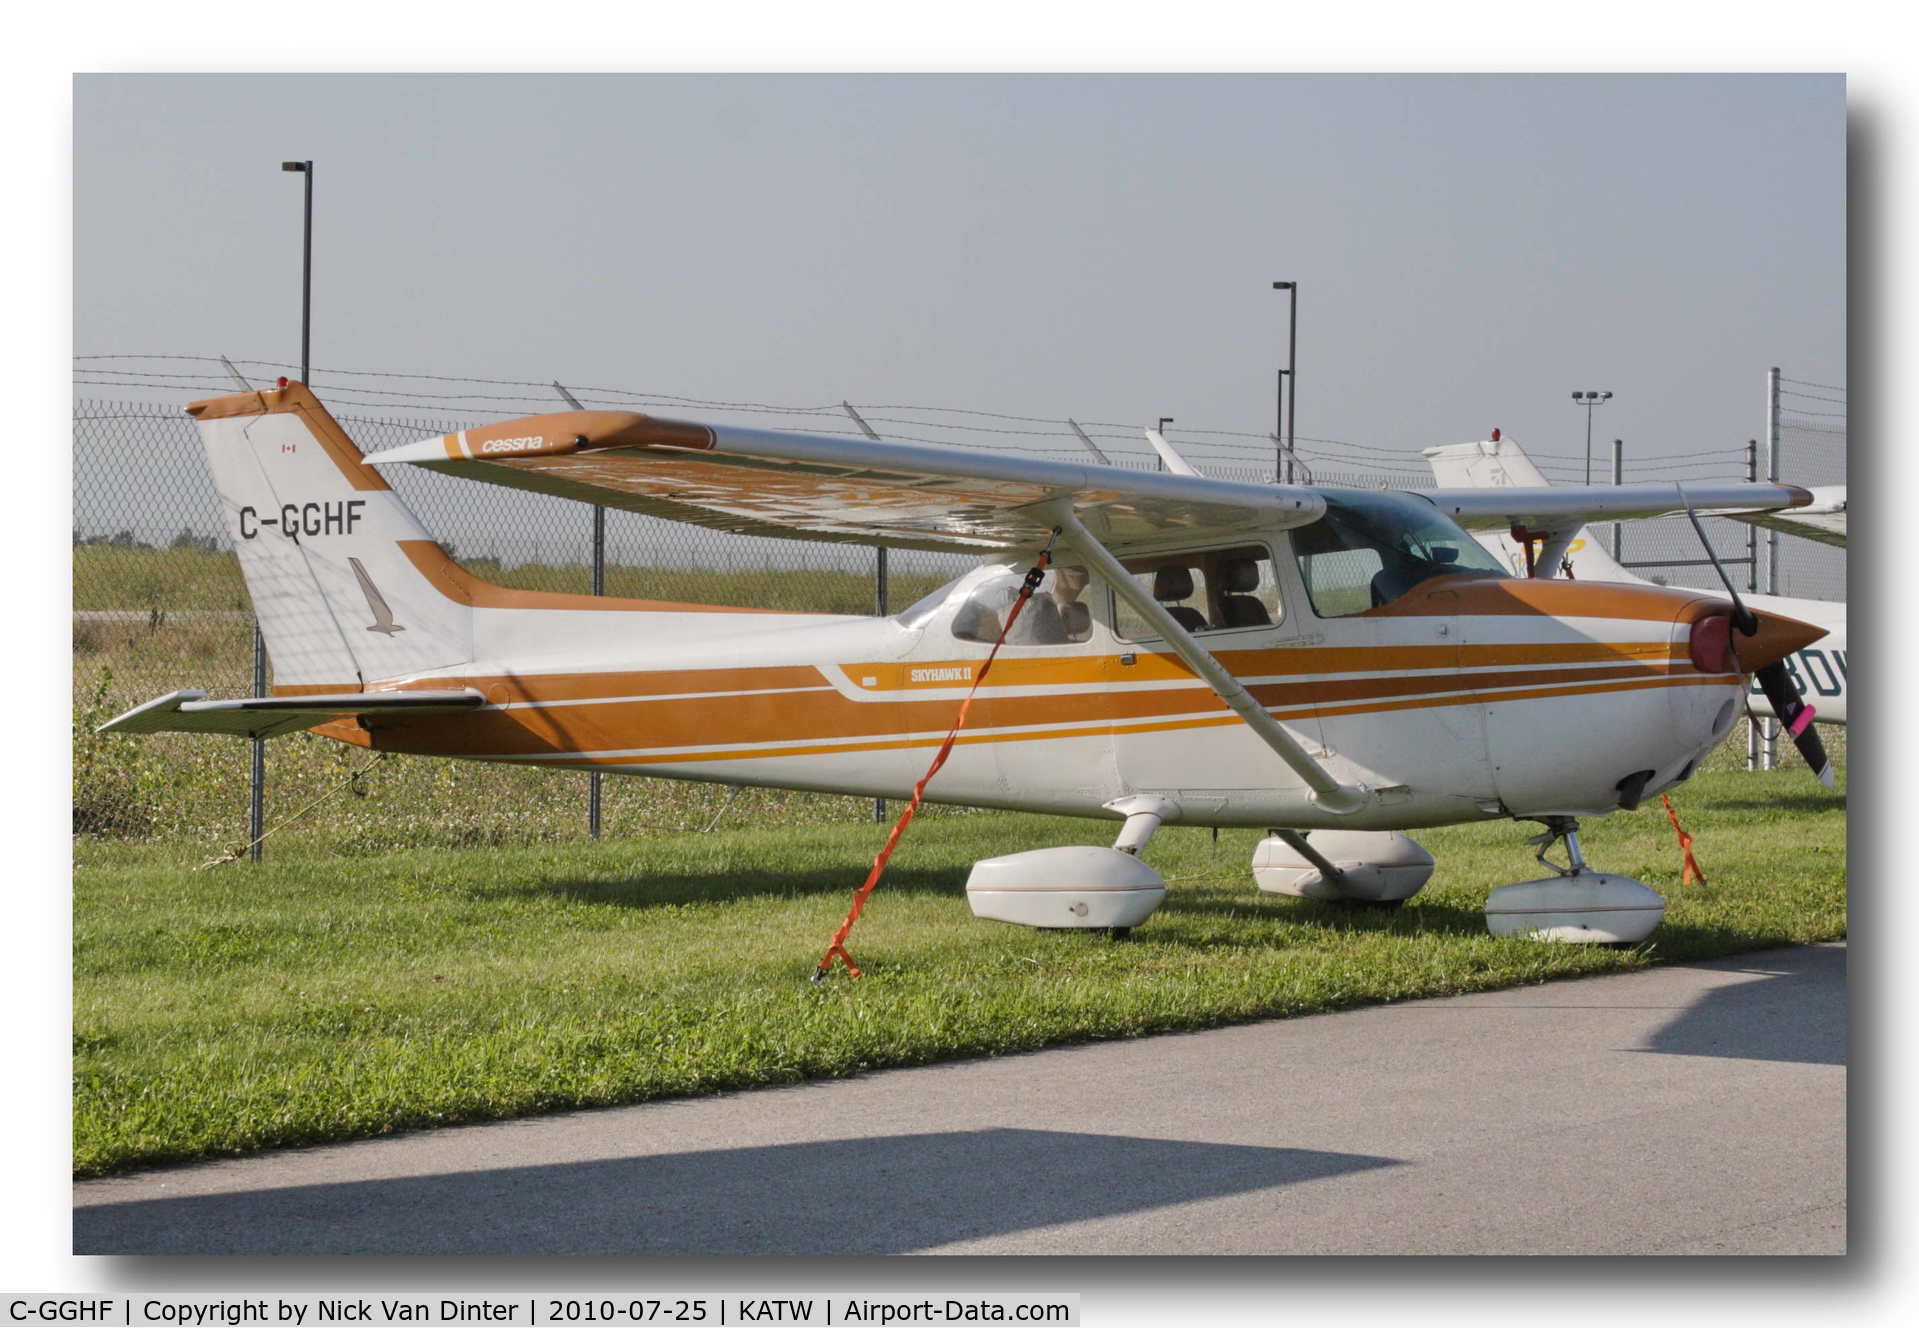 C-GGHF, 1980 Cessna 172N C/N 17273987, Sure KATW is nice ... I still want to go to Oshkosh!